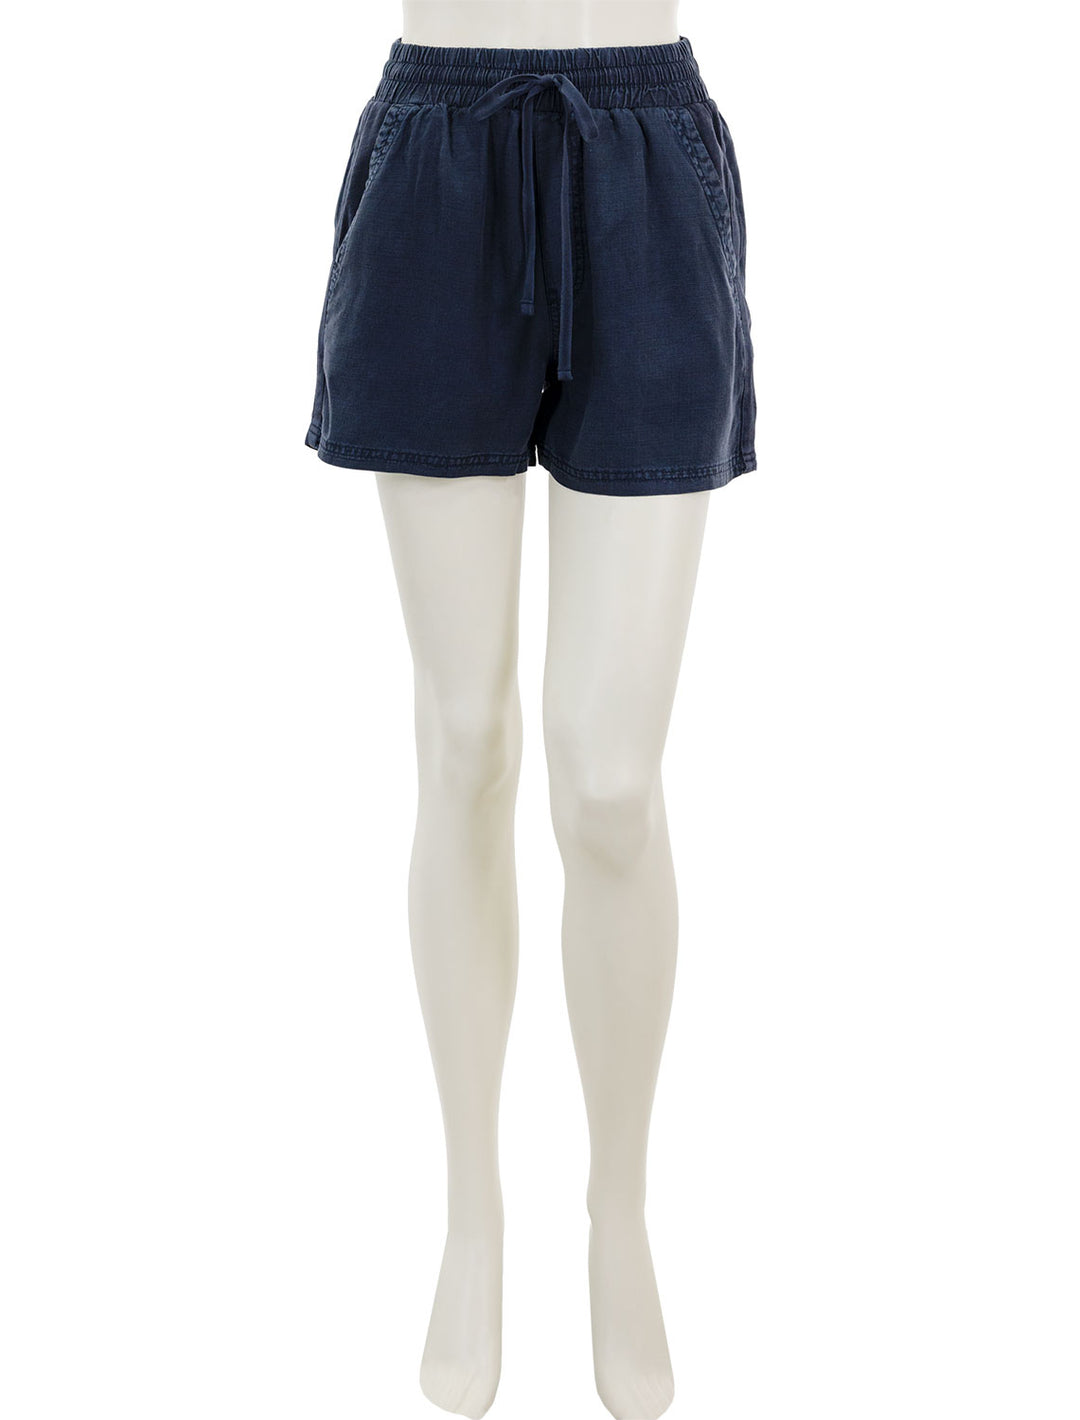 Front view of Splendid's campside shorts in navy.